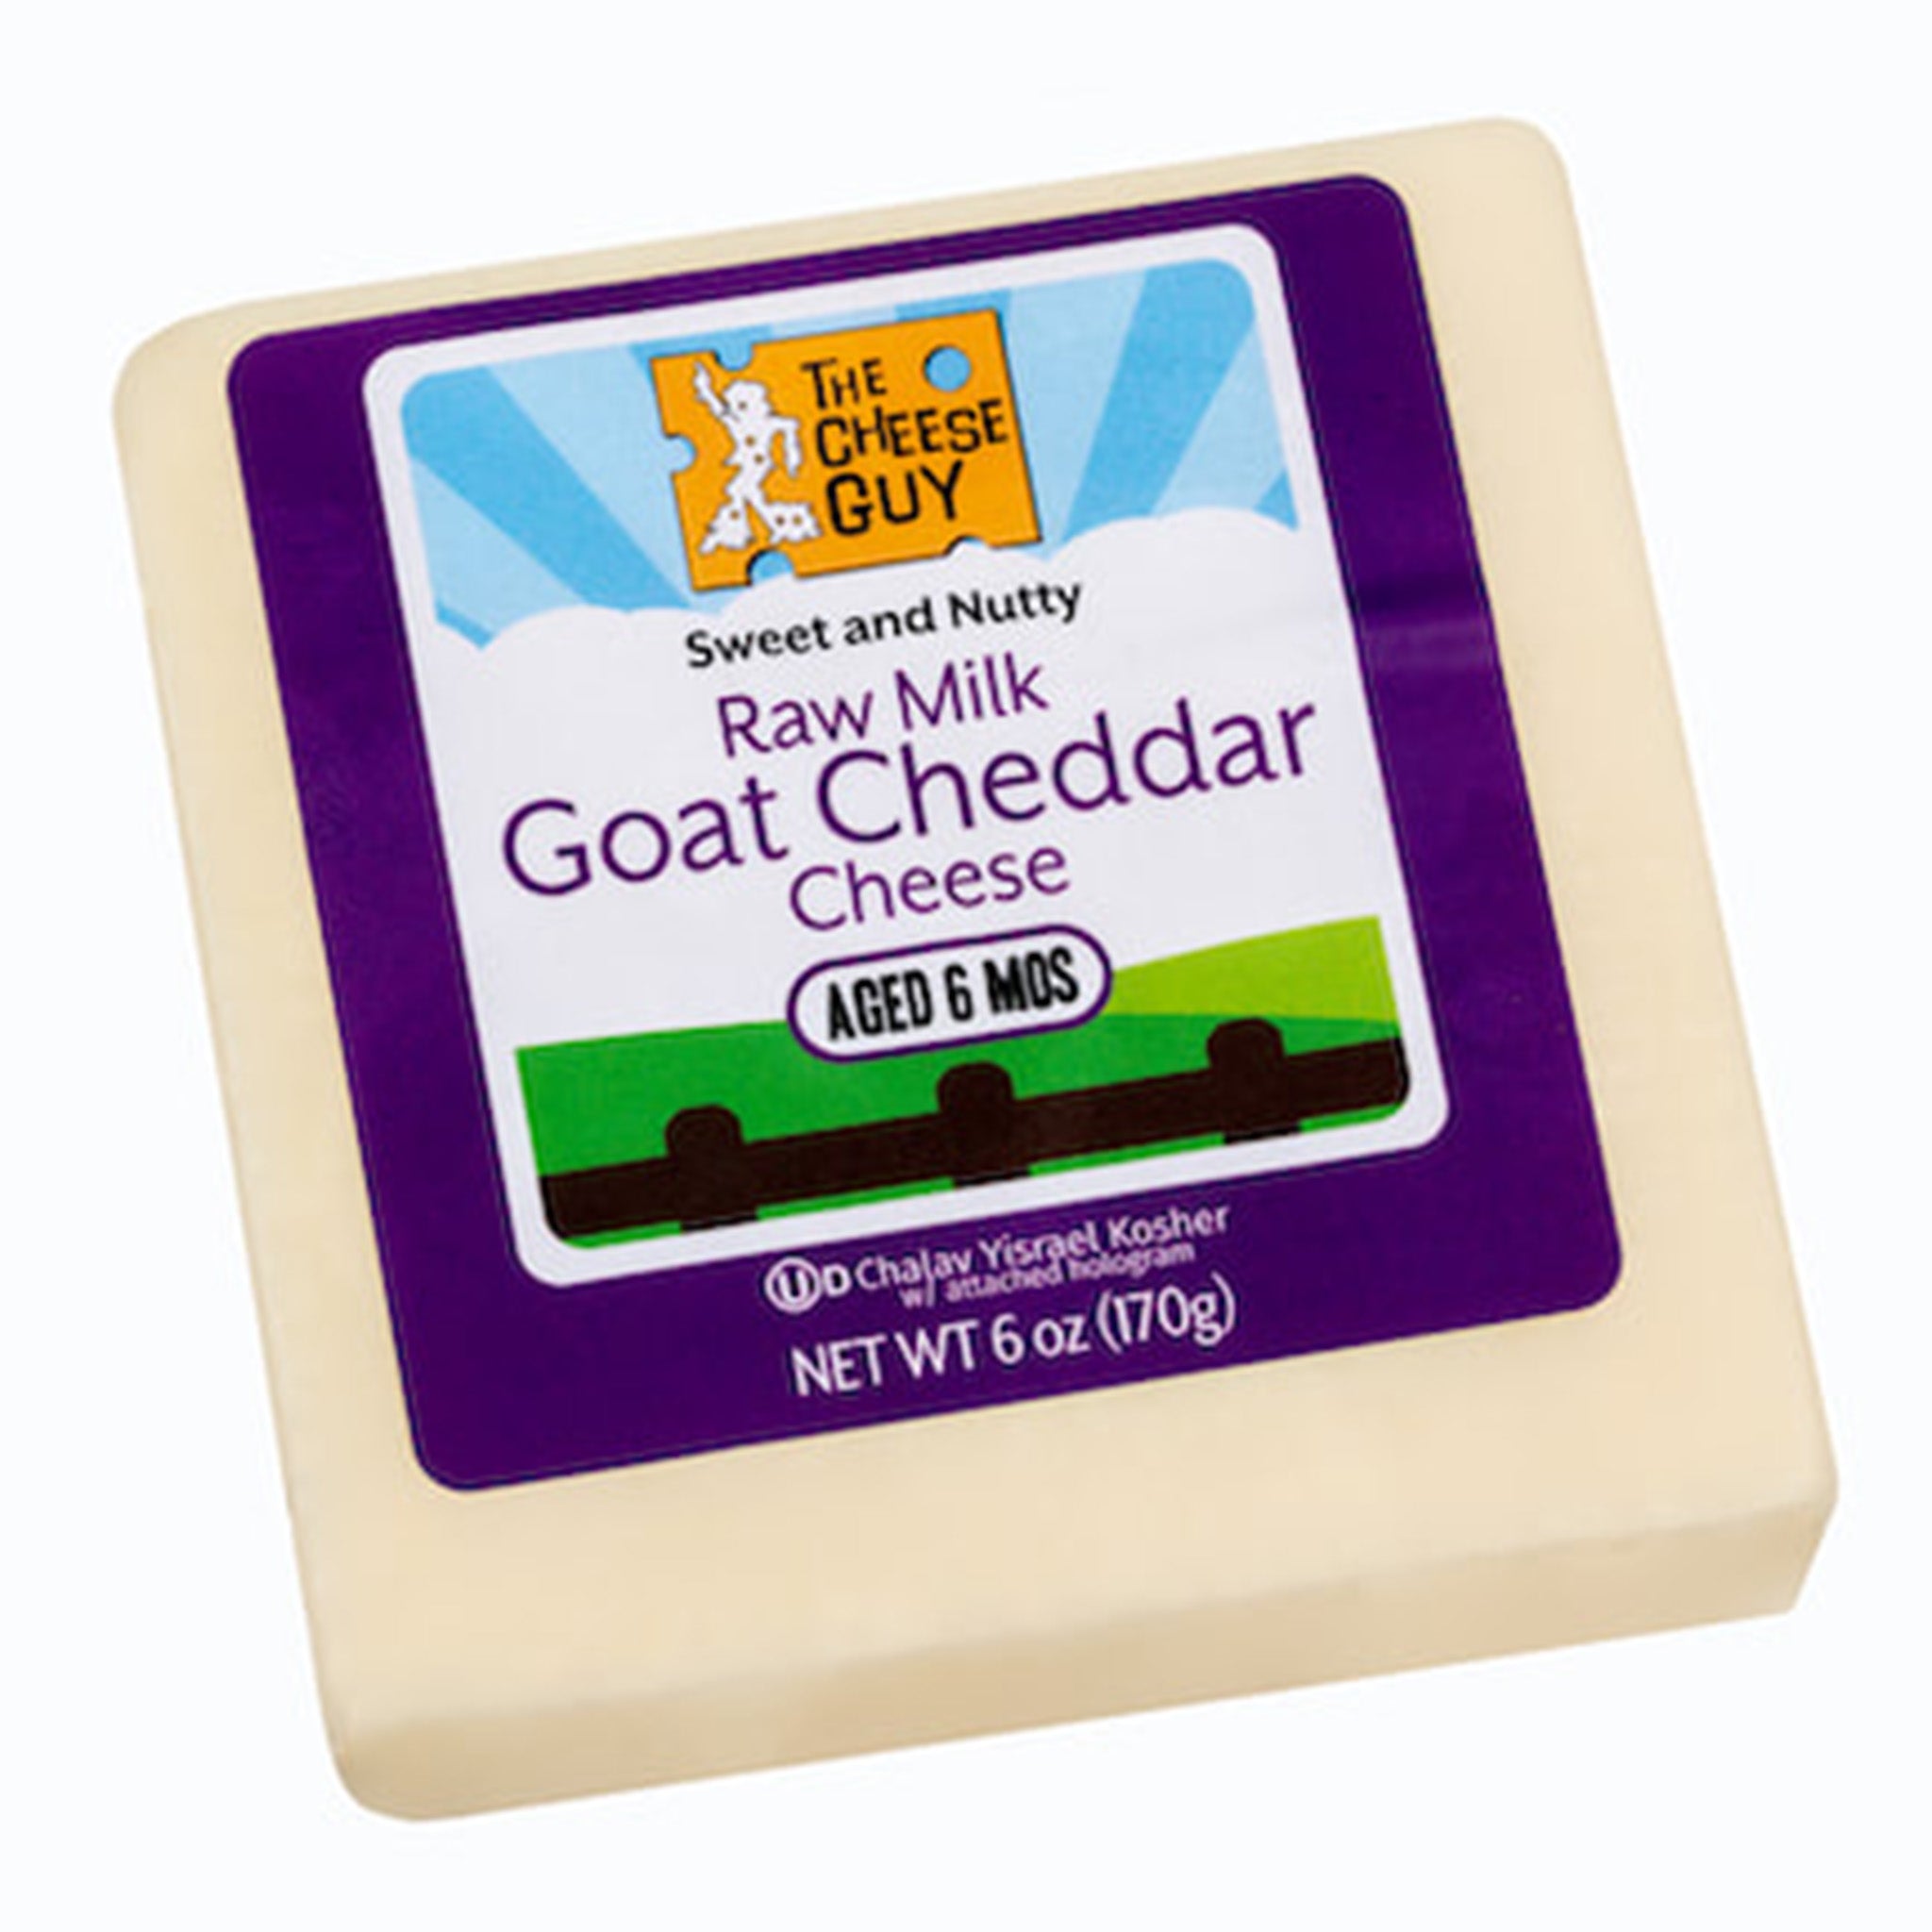 The Cheese Guy Raw Milk Goat Cheddar Cheese 8oz 12ct